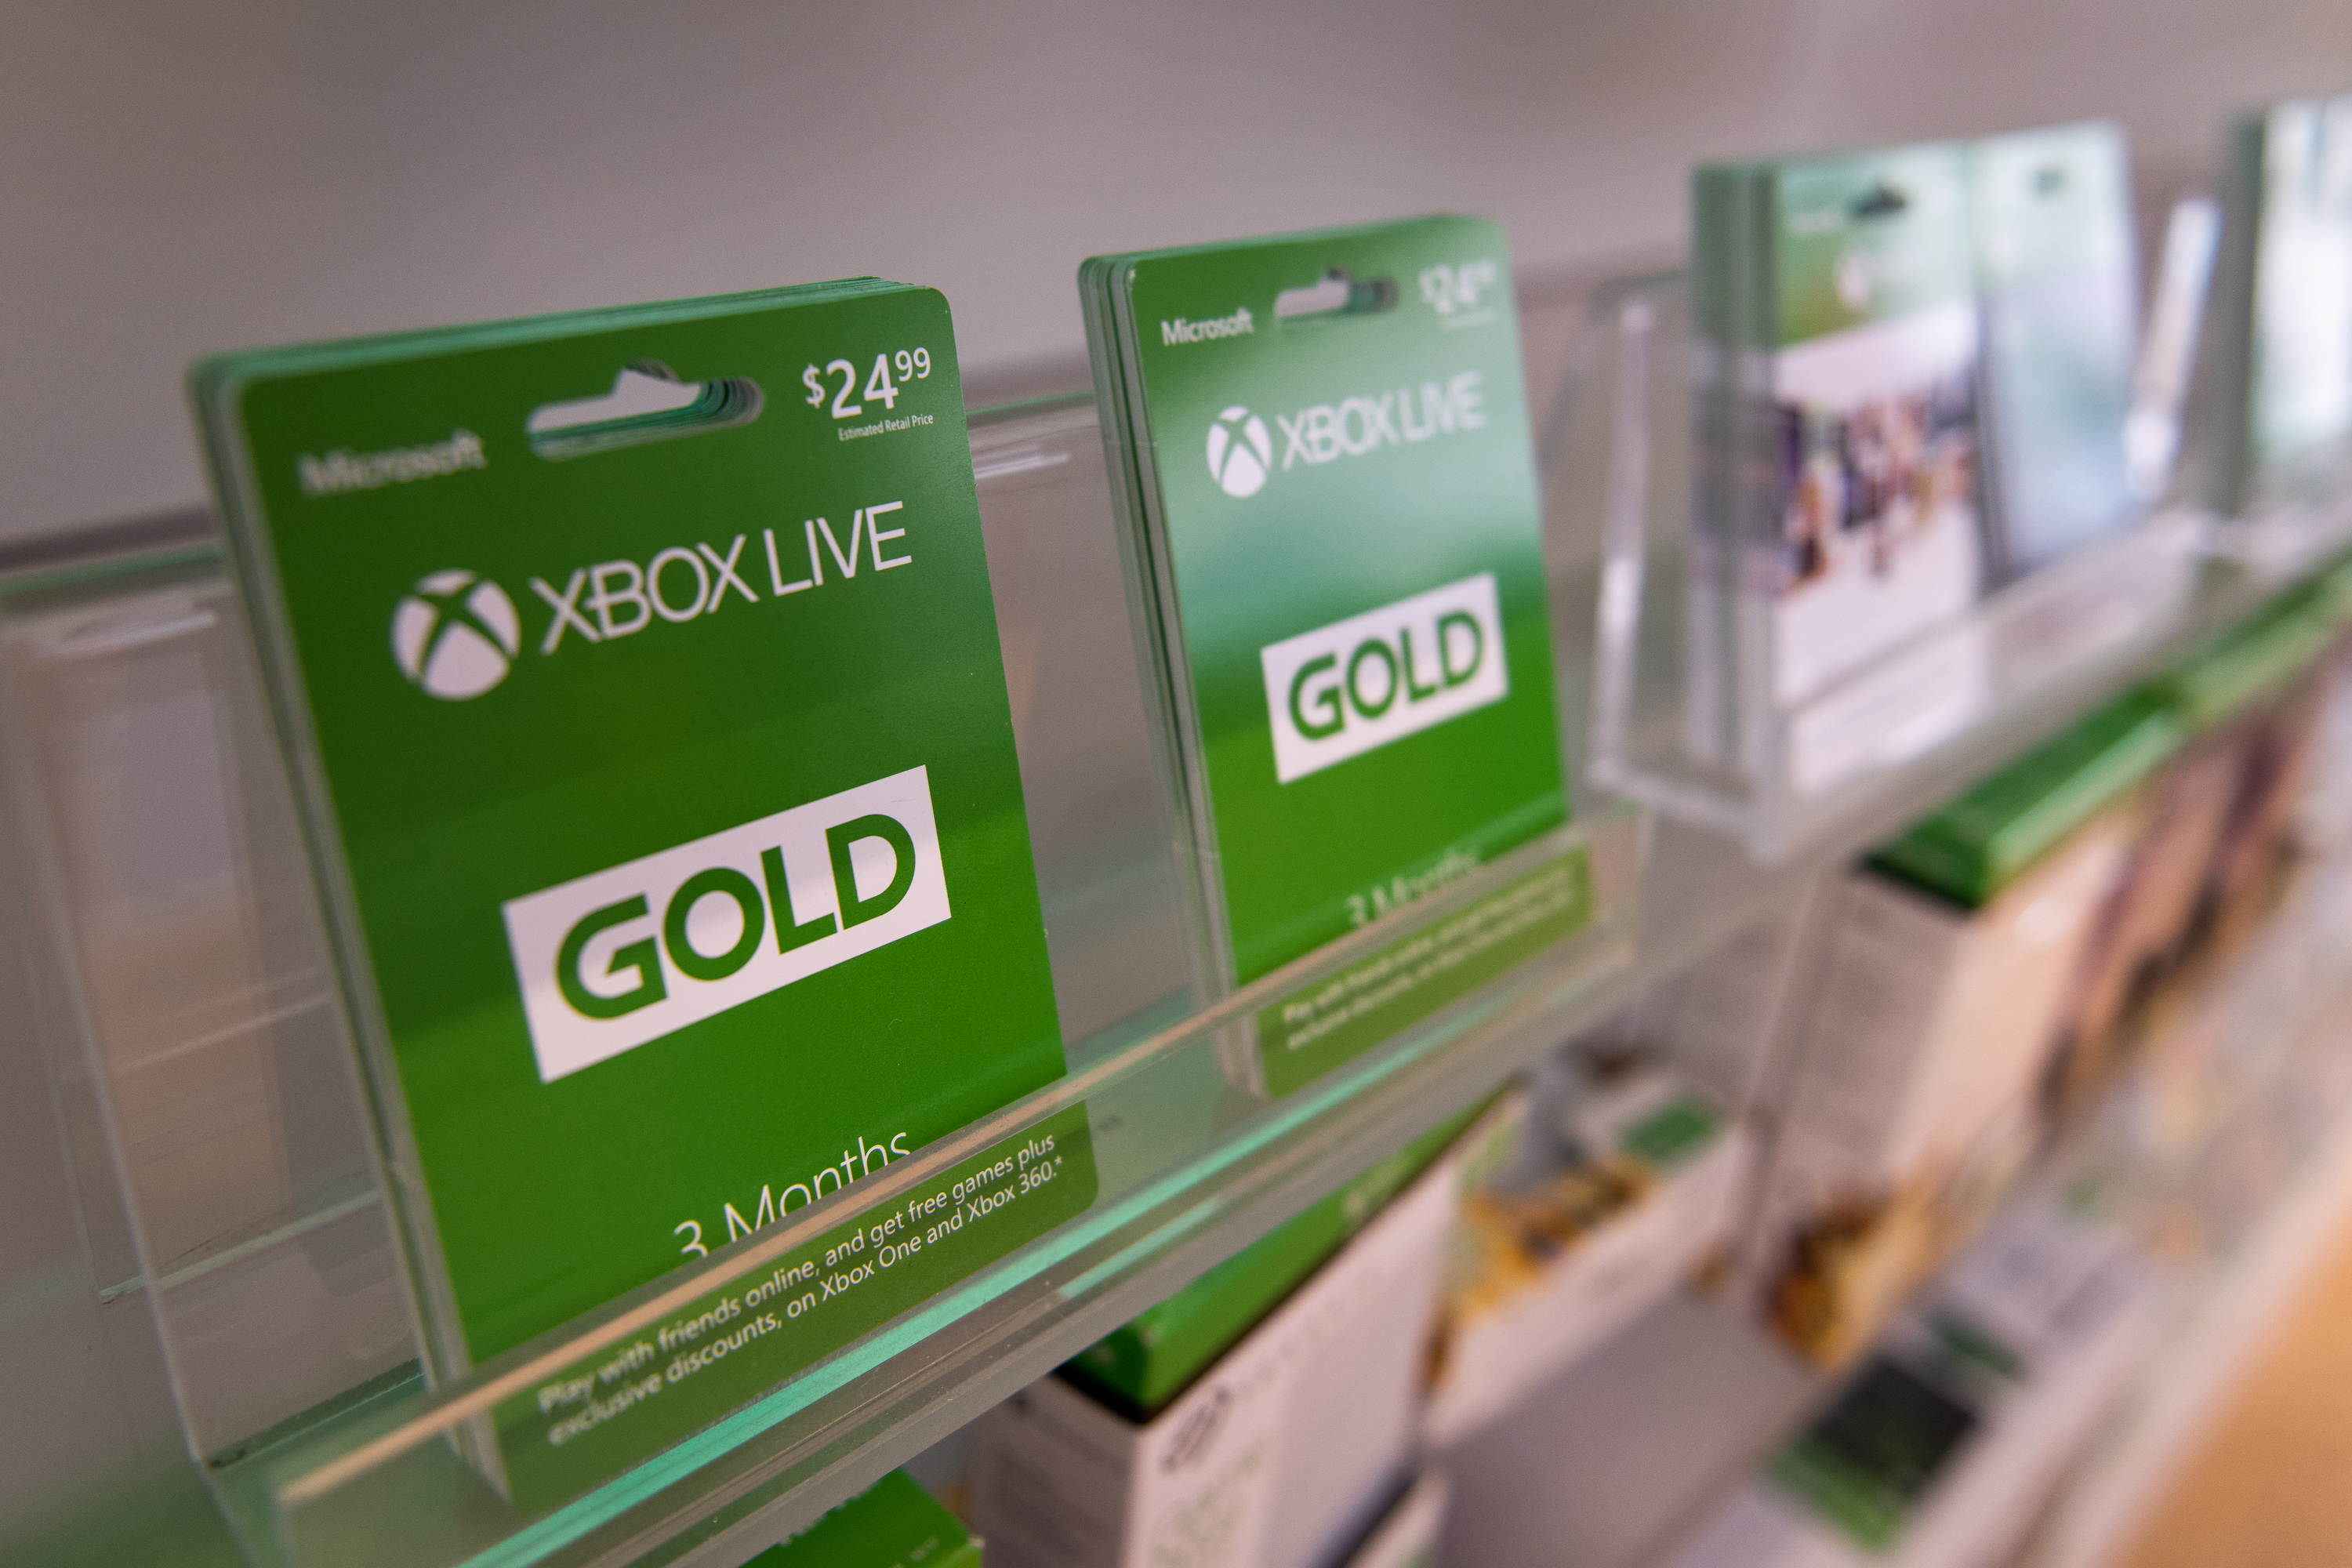 Xbox Live Gold subscription cards on a store shelf